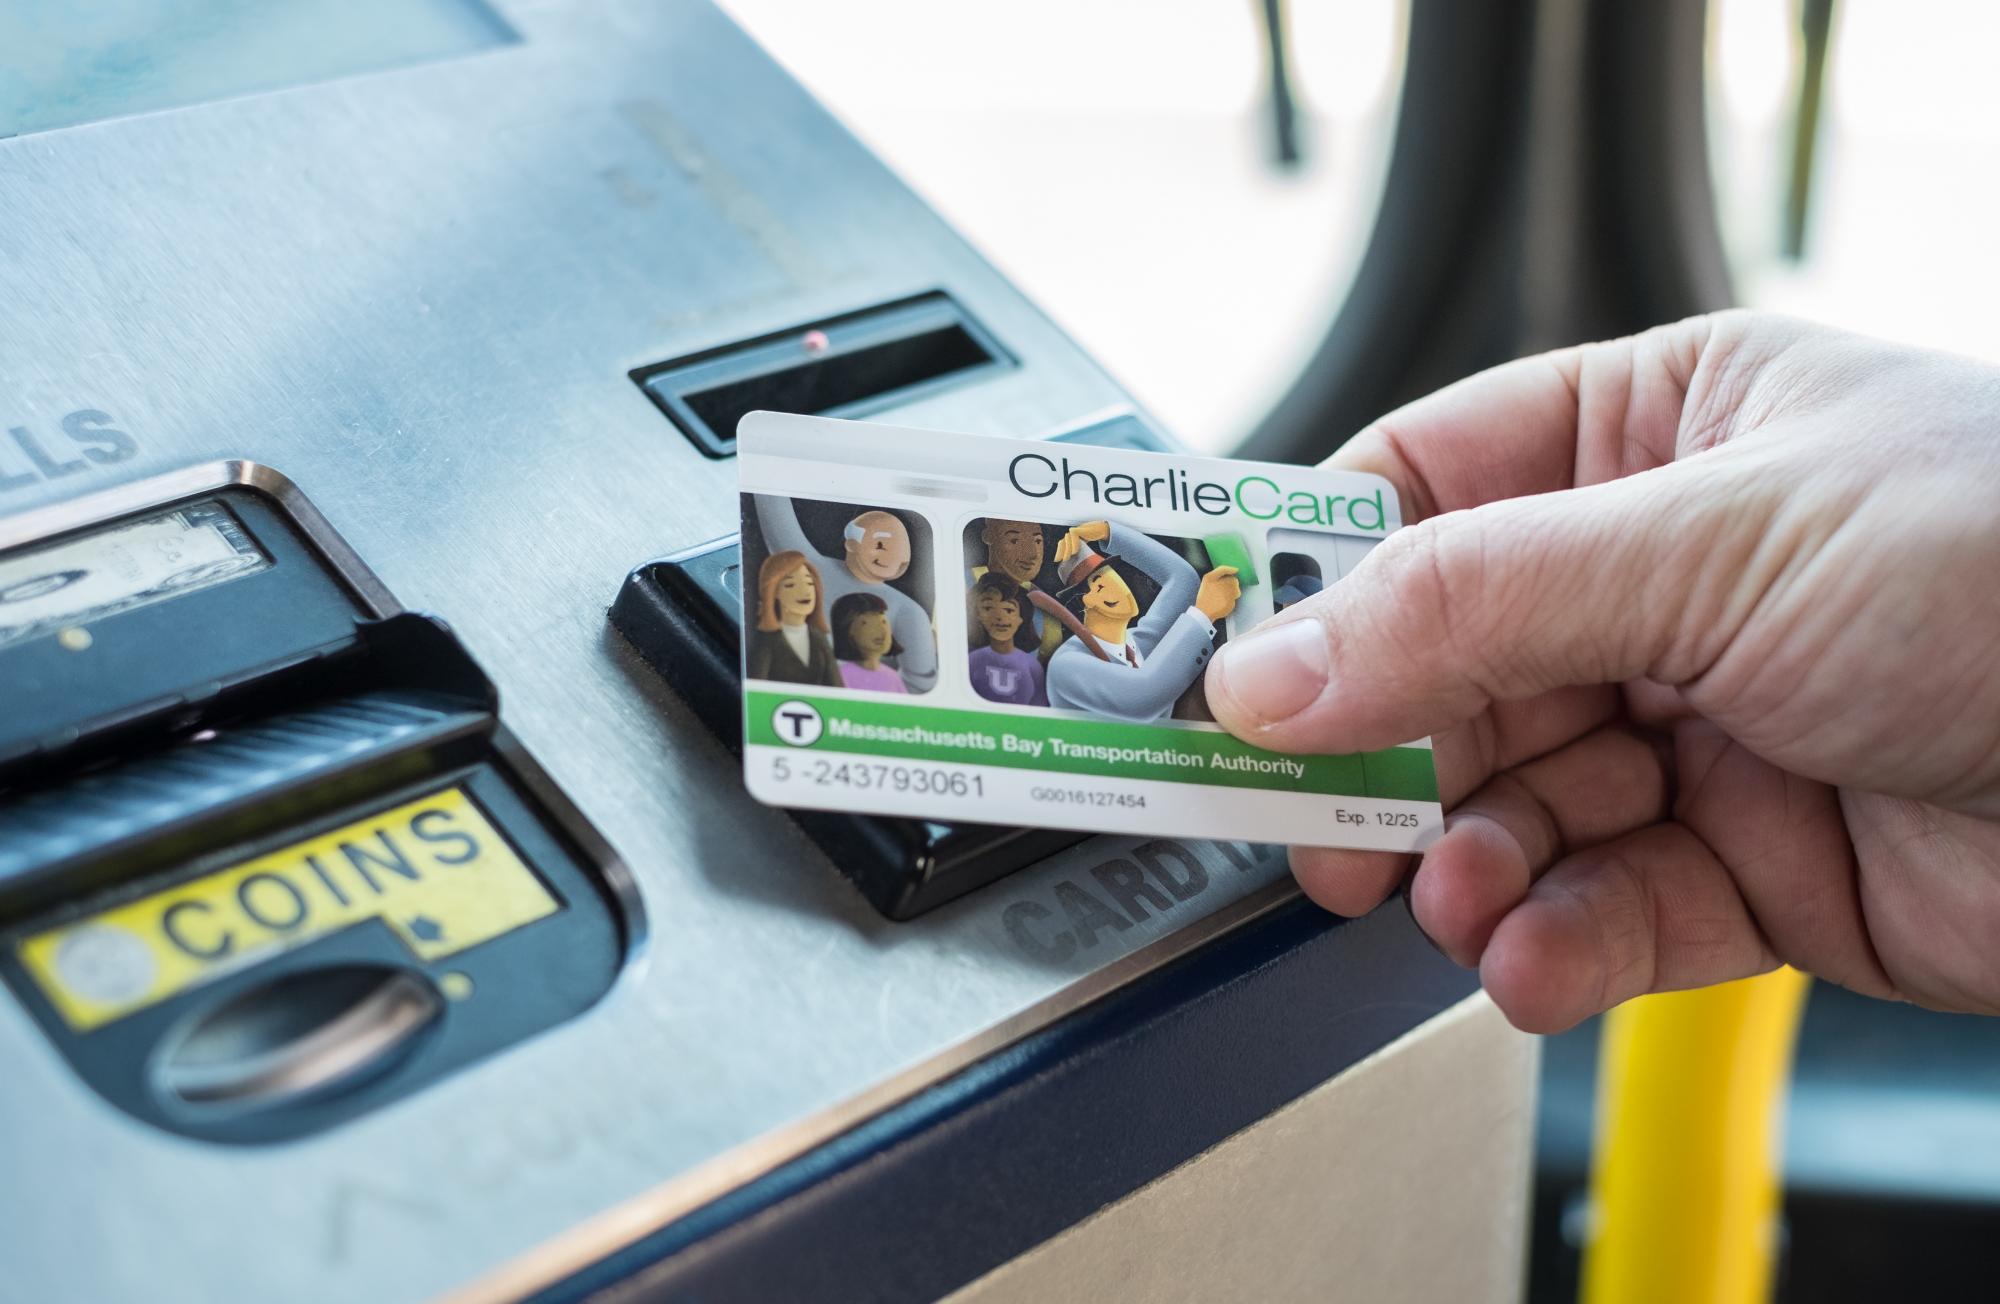 Tapping a CharlieCard on a bus